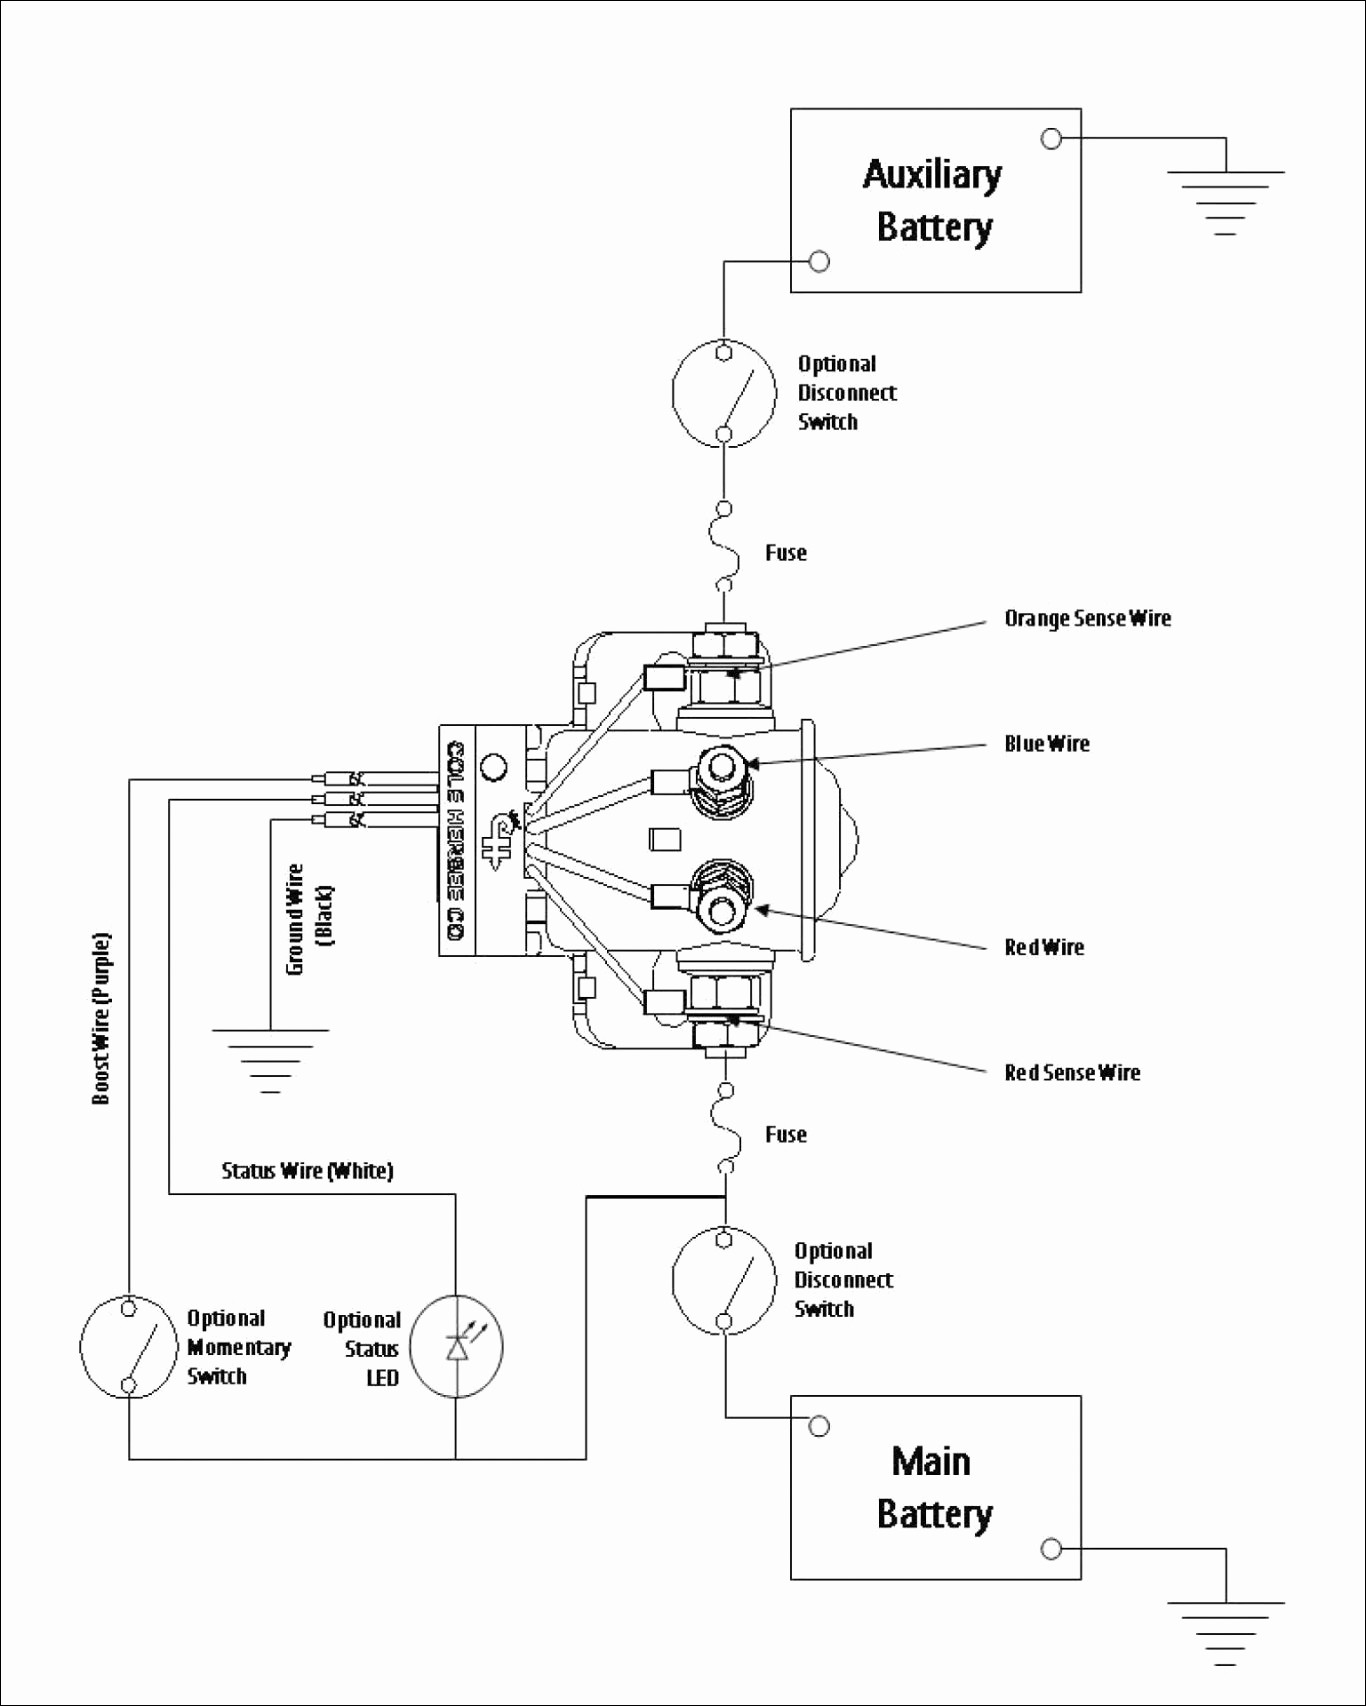 3 position rotary switch wiring diagram Switch Wiring Diagram Gallery – Wiring Diagram Collection